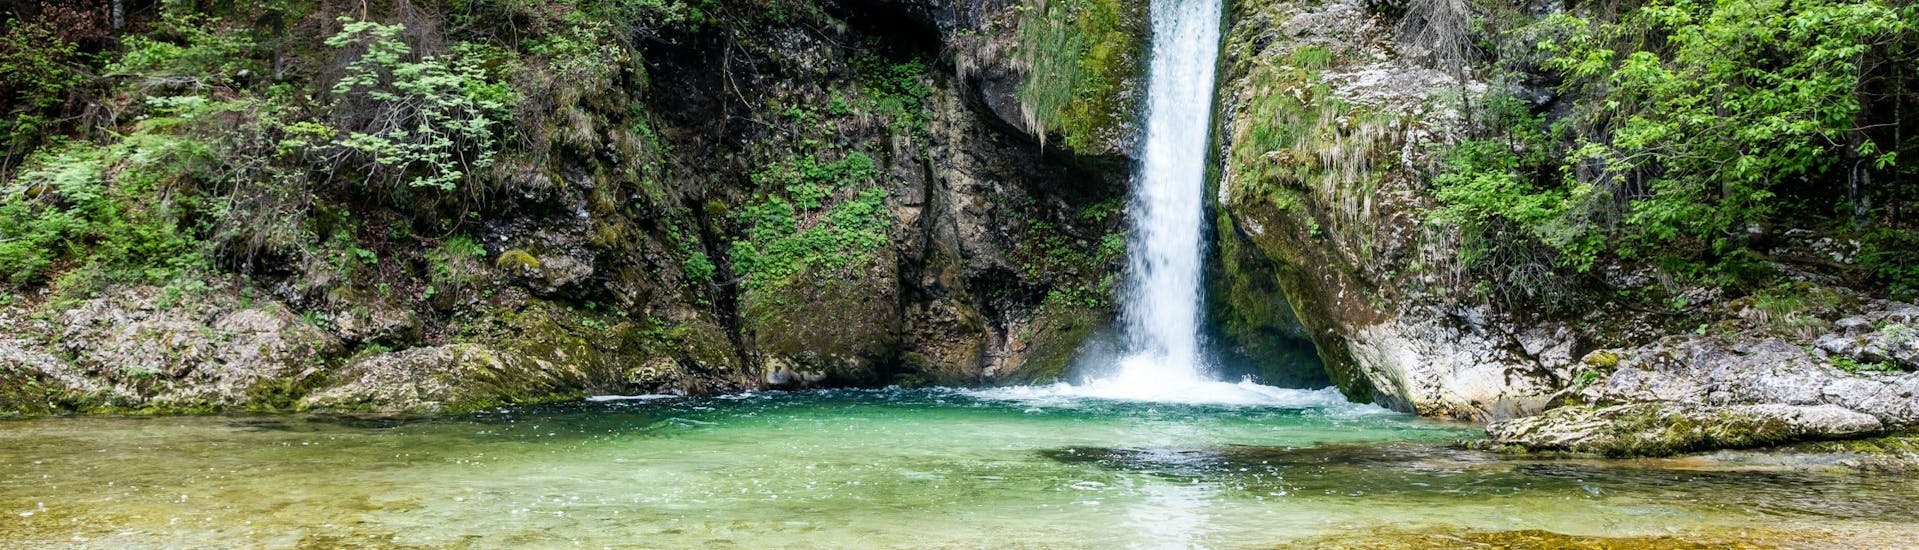 An image of a waterfall in the Grmečica gorge, a popular place to go canyoning near Bled.